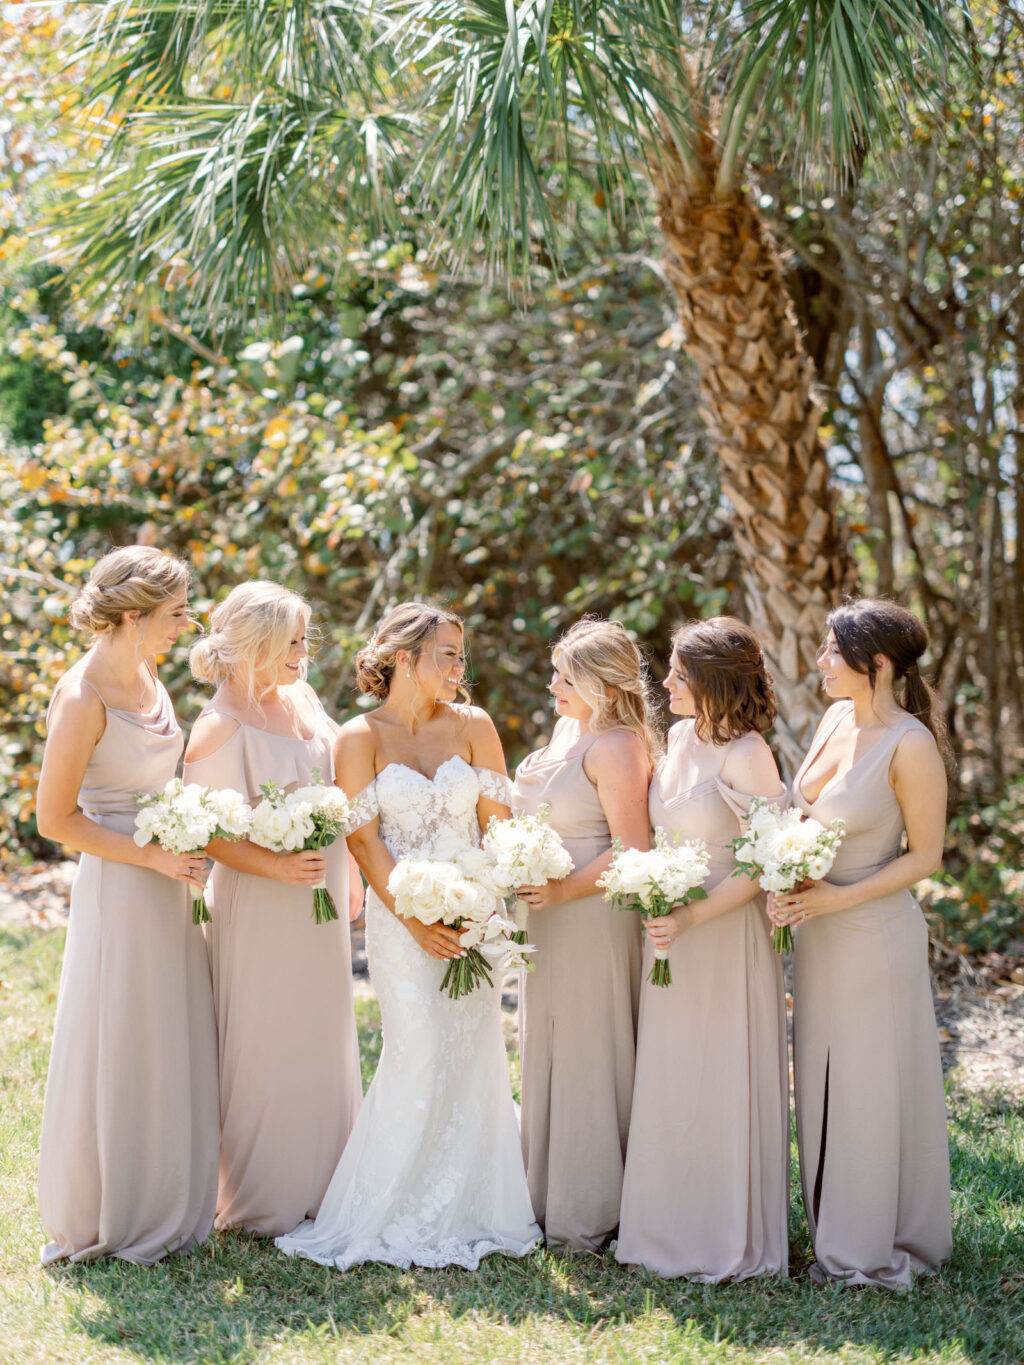 Florida Bride and Bridal Party, Wearing Beige Mismatched Long Birdy Grey Bridesmaids Dresses, Holding White Floral Bouquets, Bride Wearing Off The Should Wedding Dress